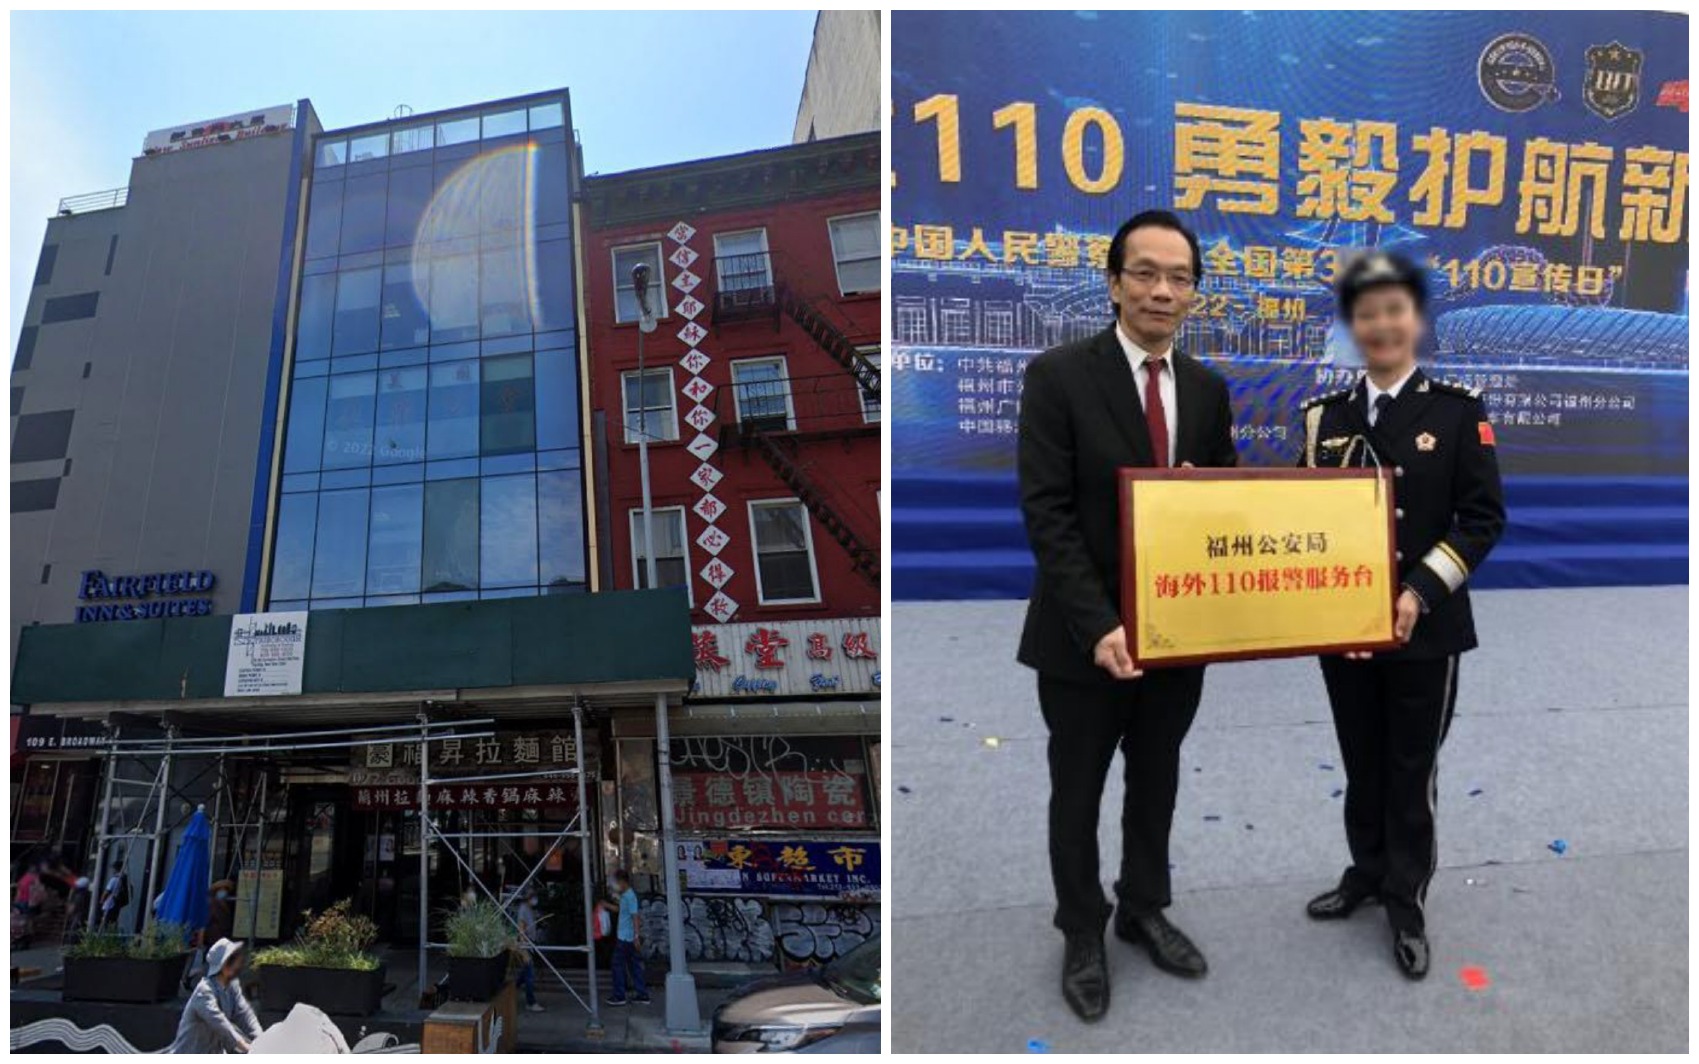 Images included in the complaint depicting the alleged undeclared Chinese office in Manhattan, left, and Lu Jianwang posing with a Chinese police officer and a sign seemingly acknowledging the "overseas station." (United States District Court Eastern District of New York)